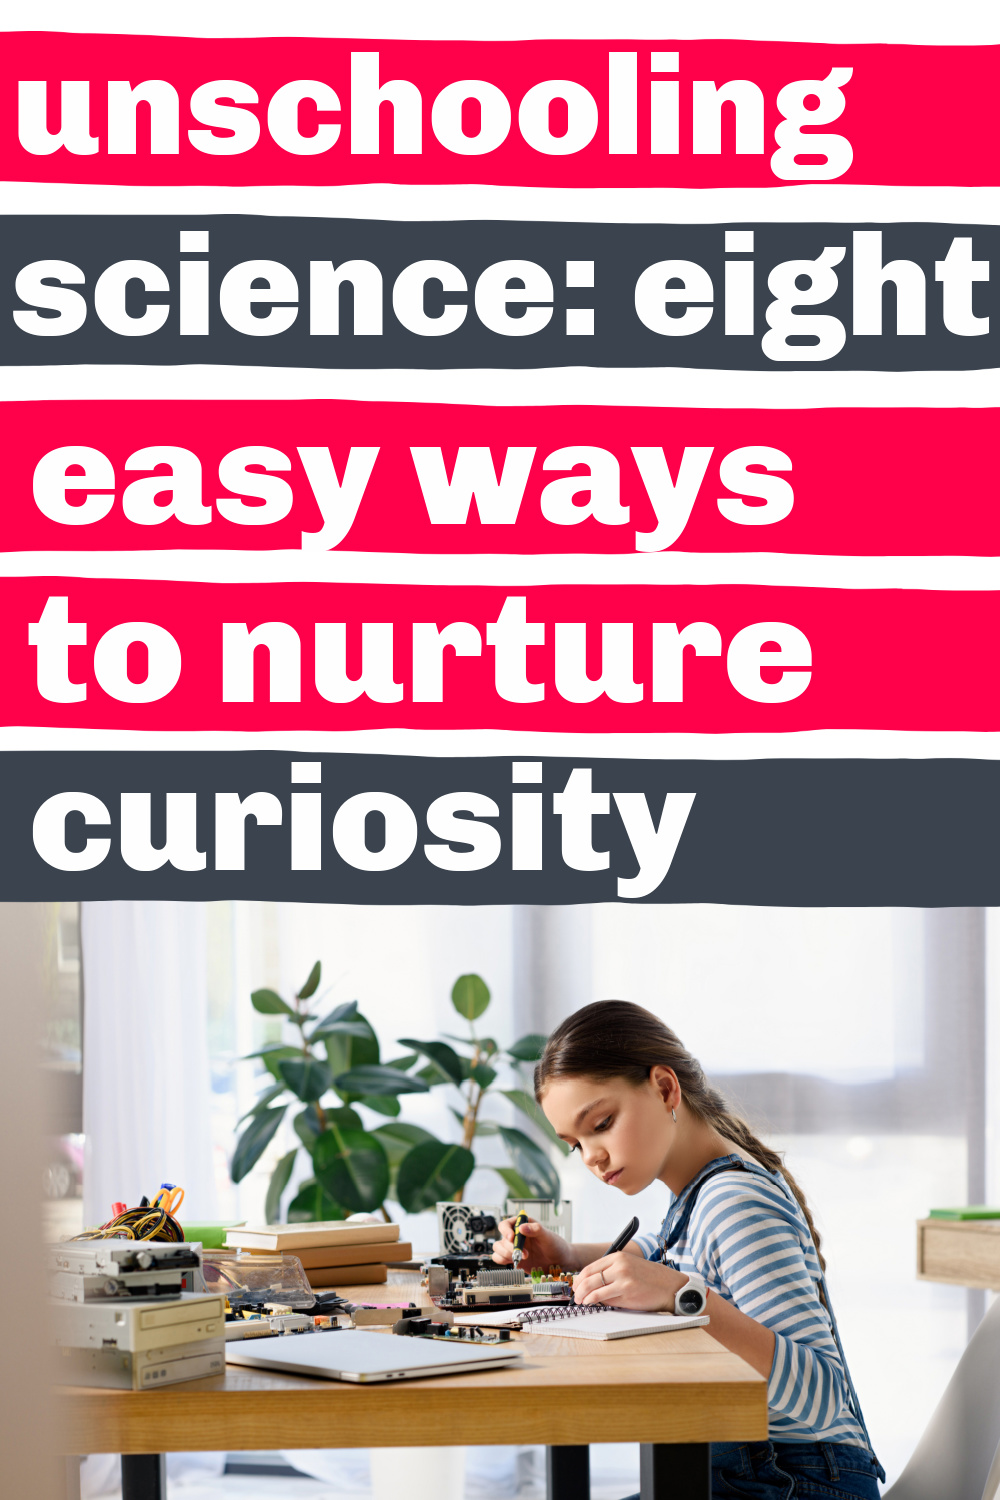 girl sitting at desk taking apart a computer motherboard, with text overlay "unschooling science: eight easy ways to nurture curiosity"